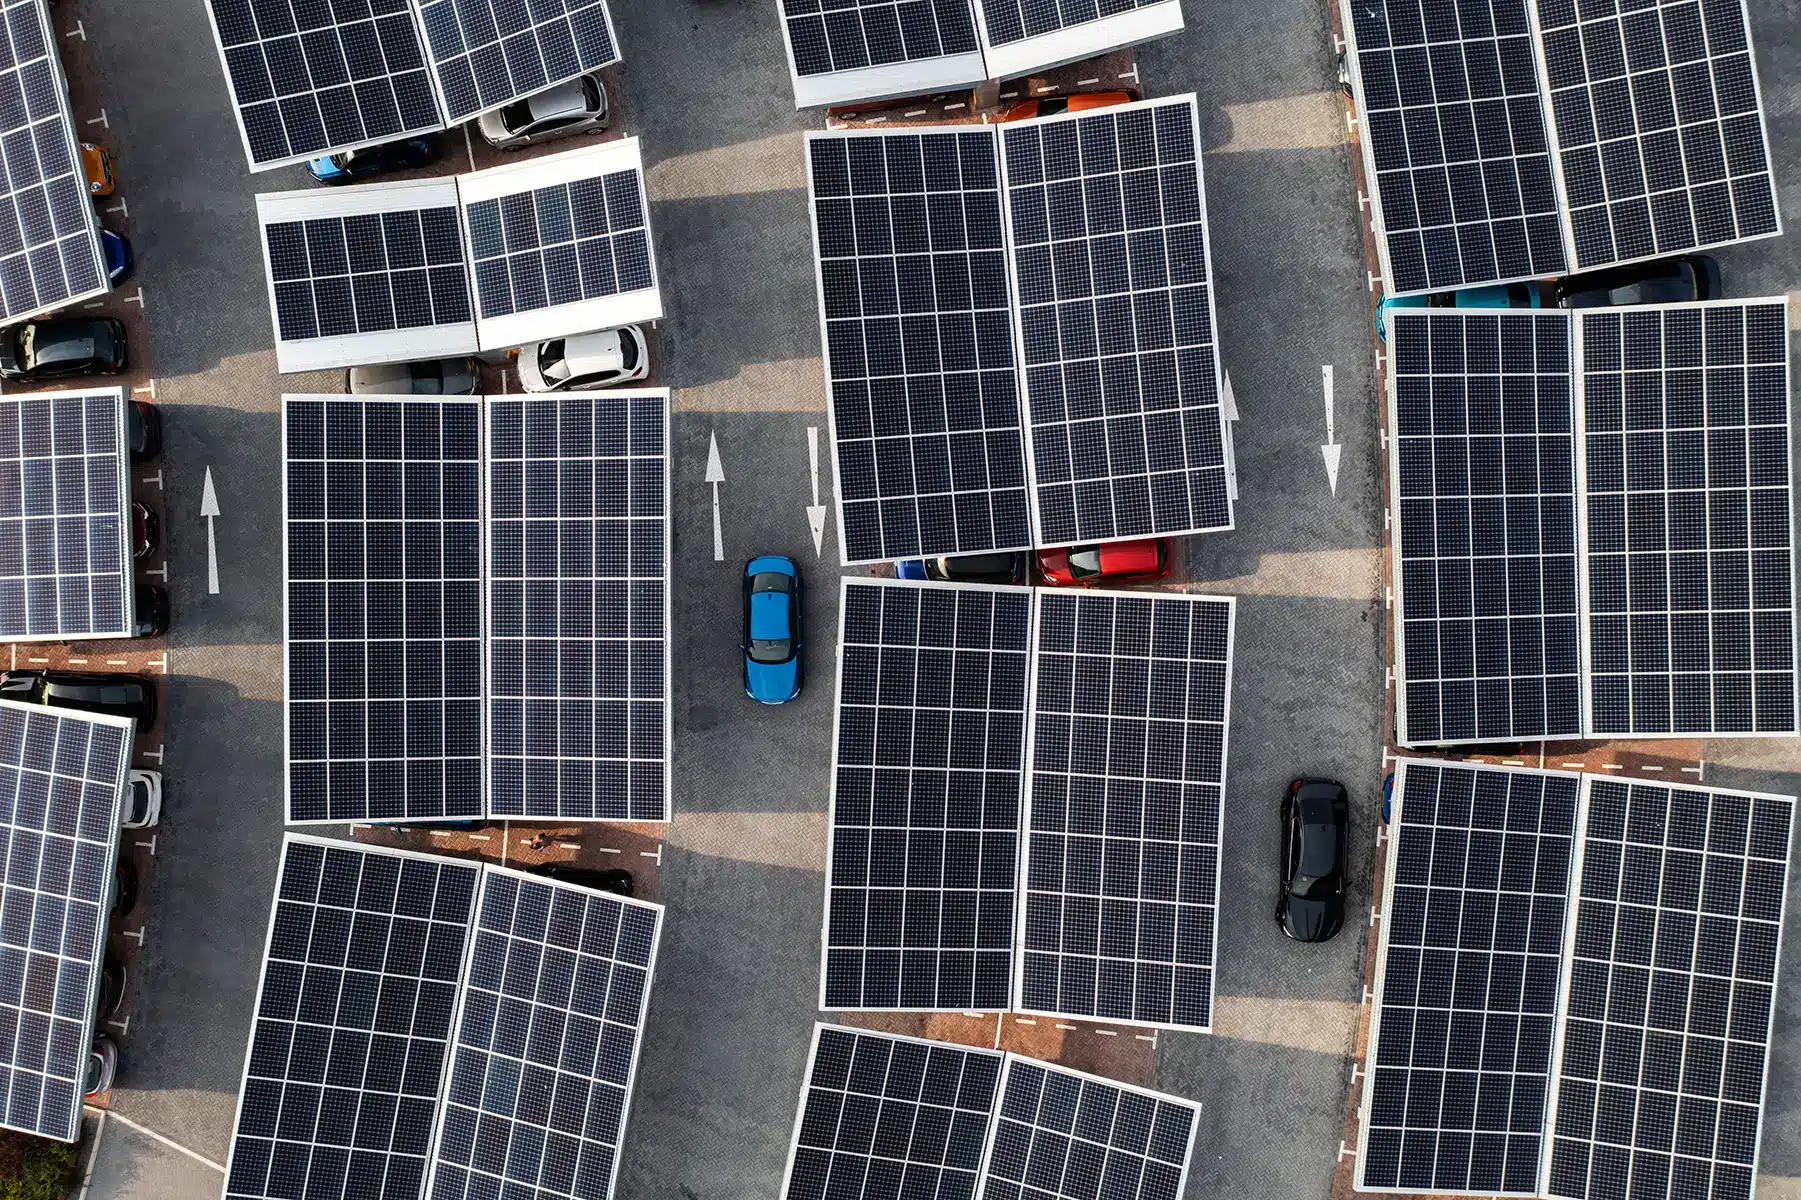 Aerial view directly above electric cars parking under solar panels on a parking lot rooftop ready for charging